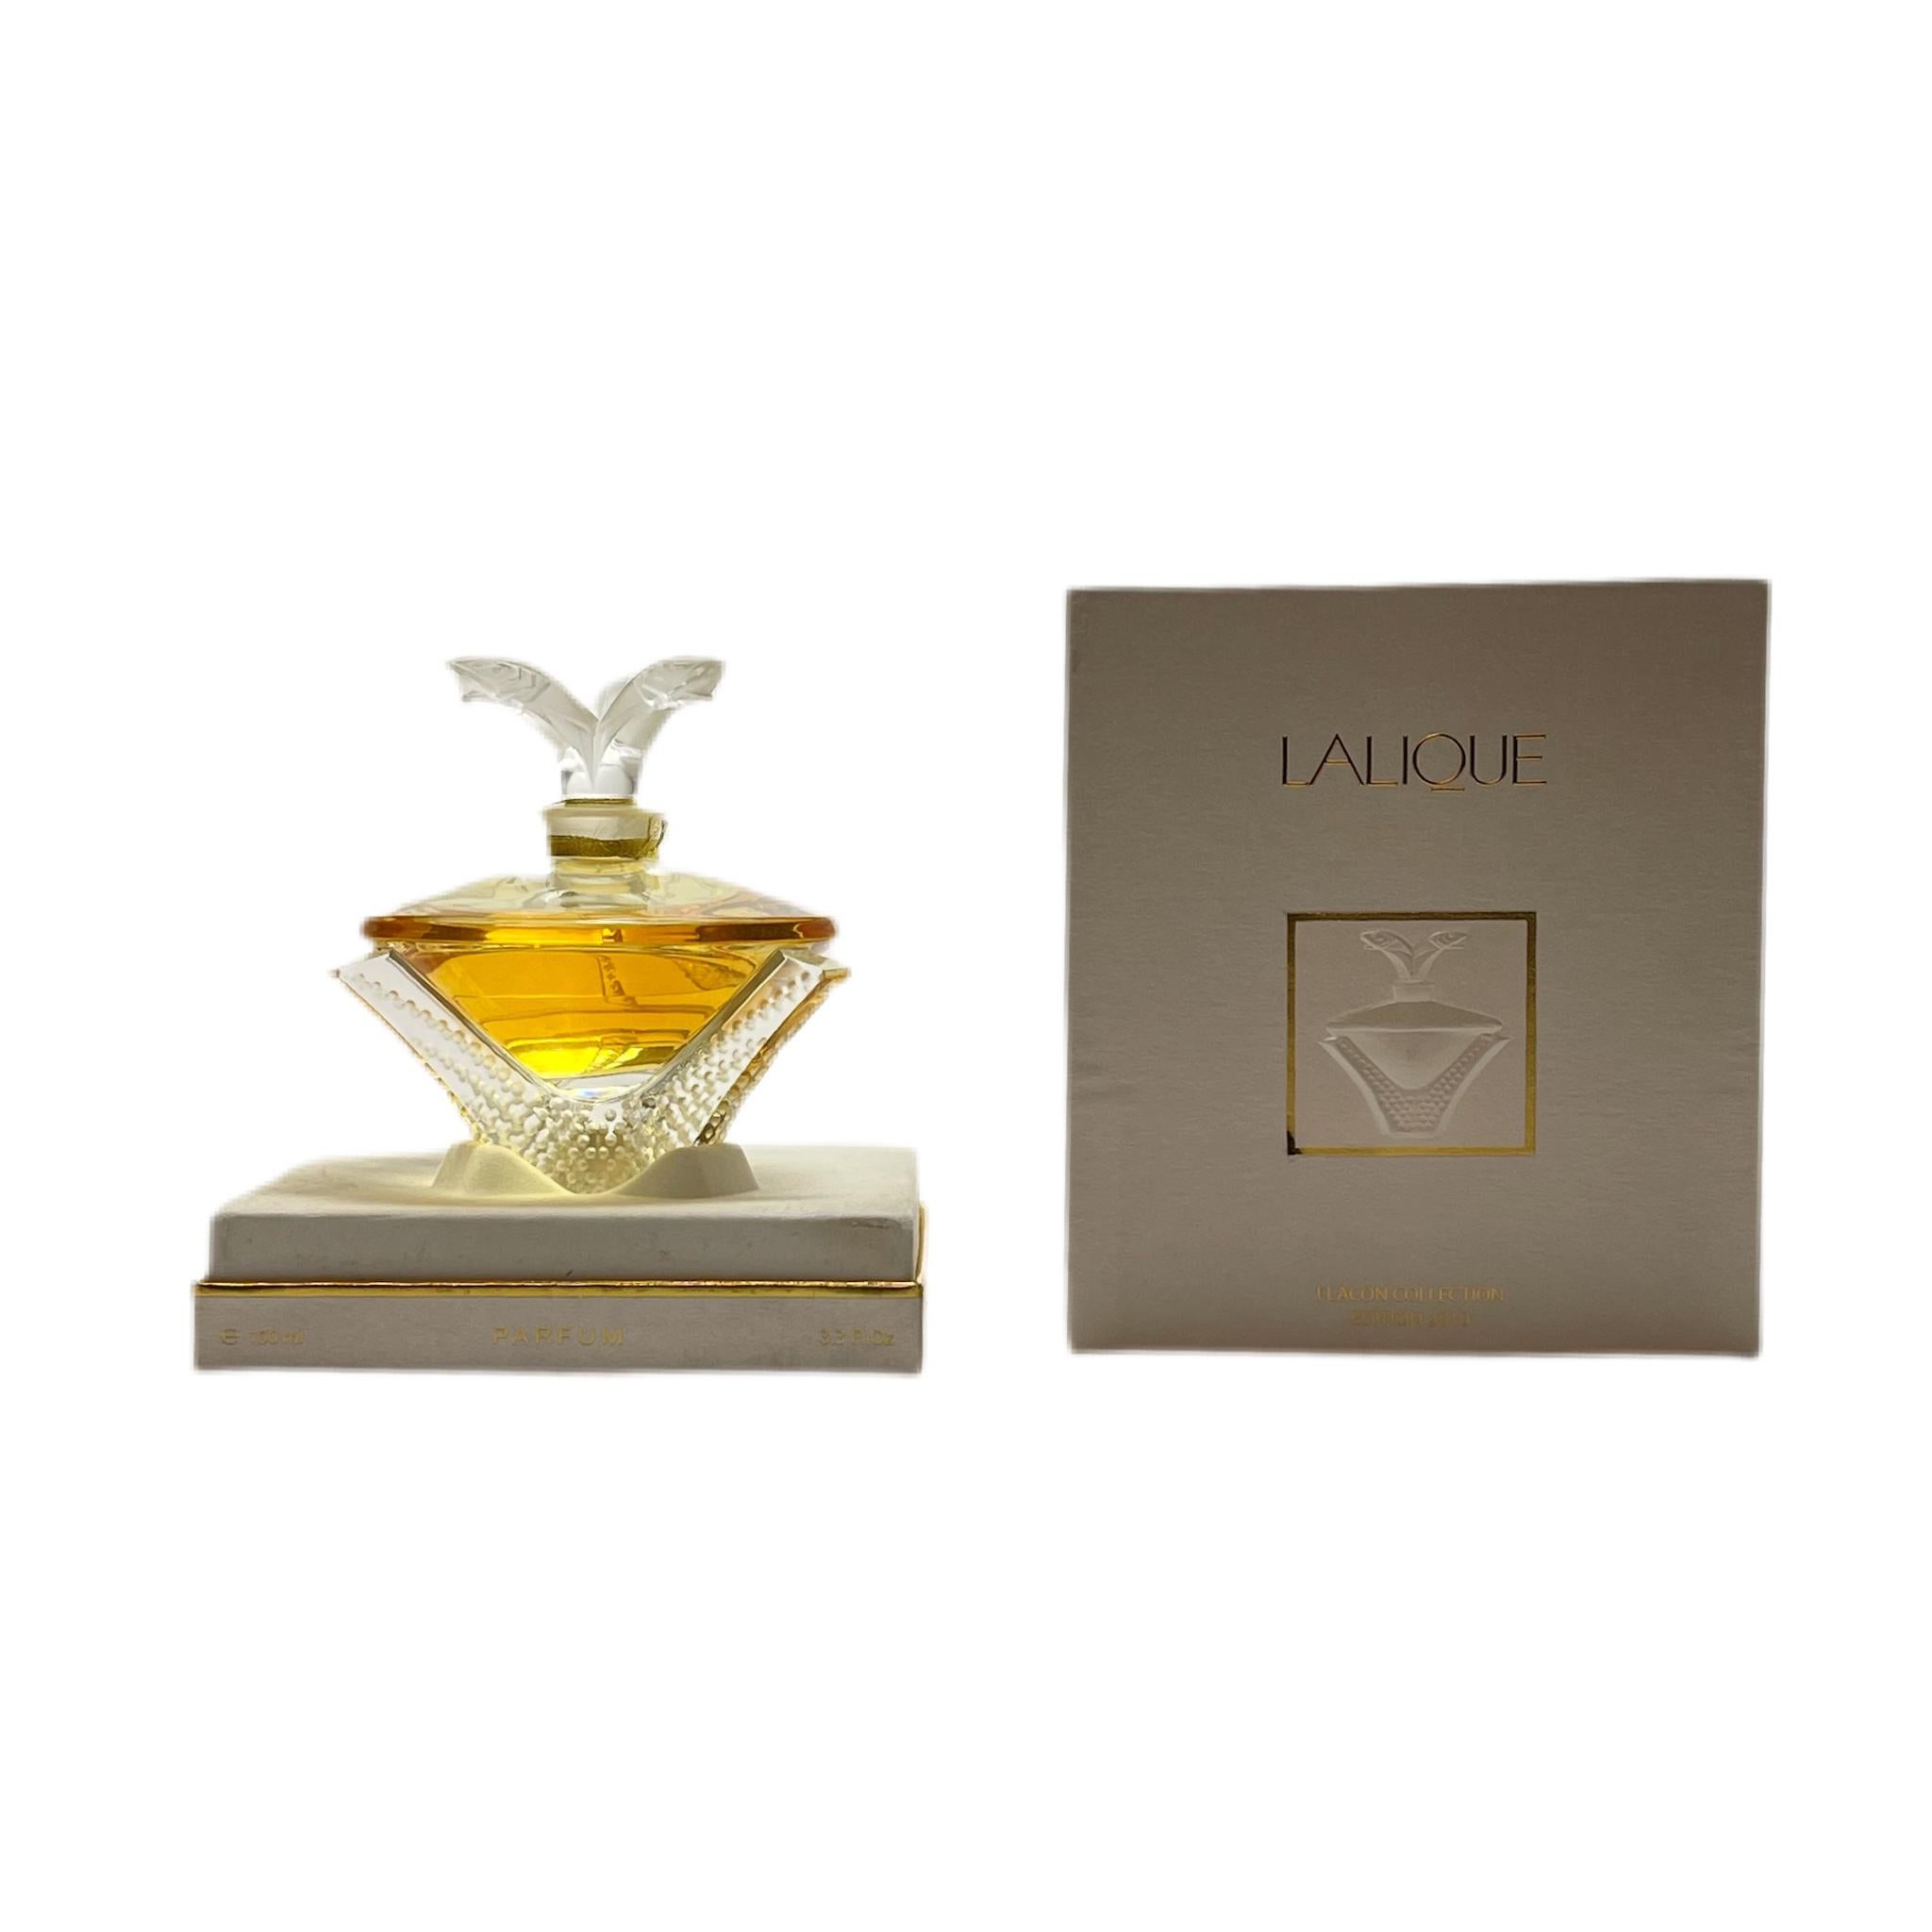 lalique limited edition perfume bottles